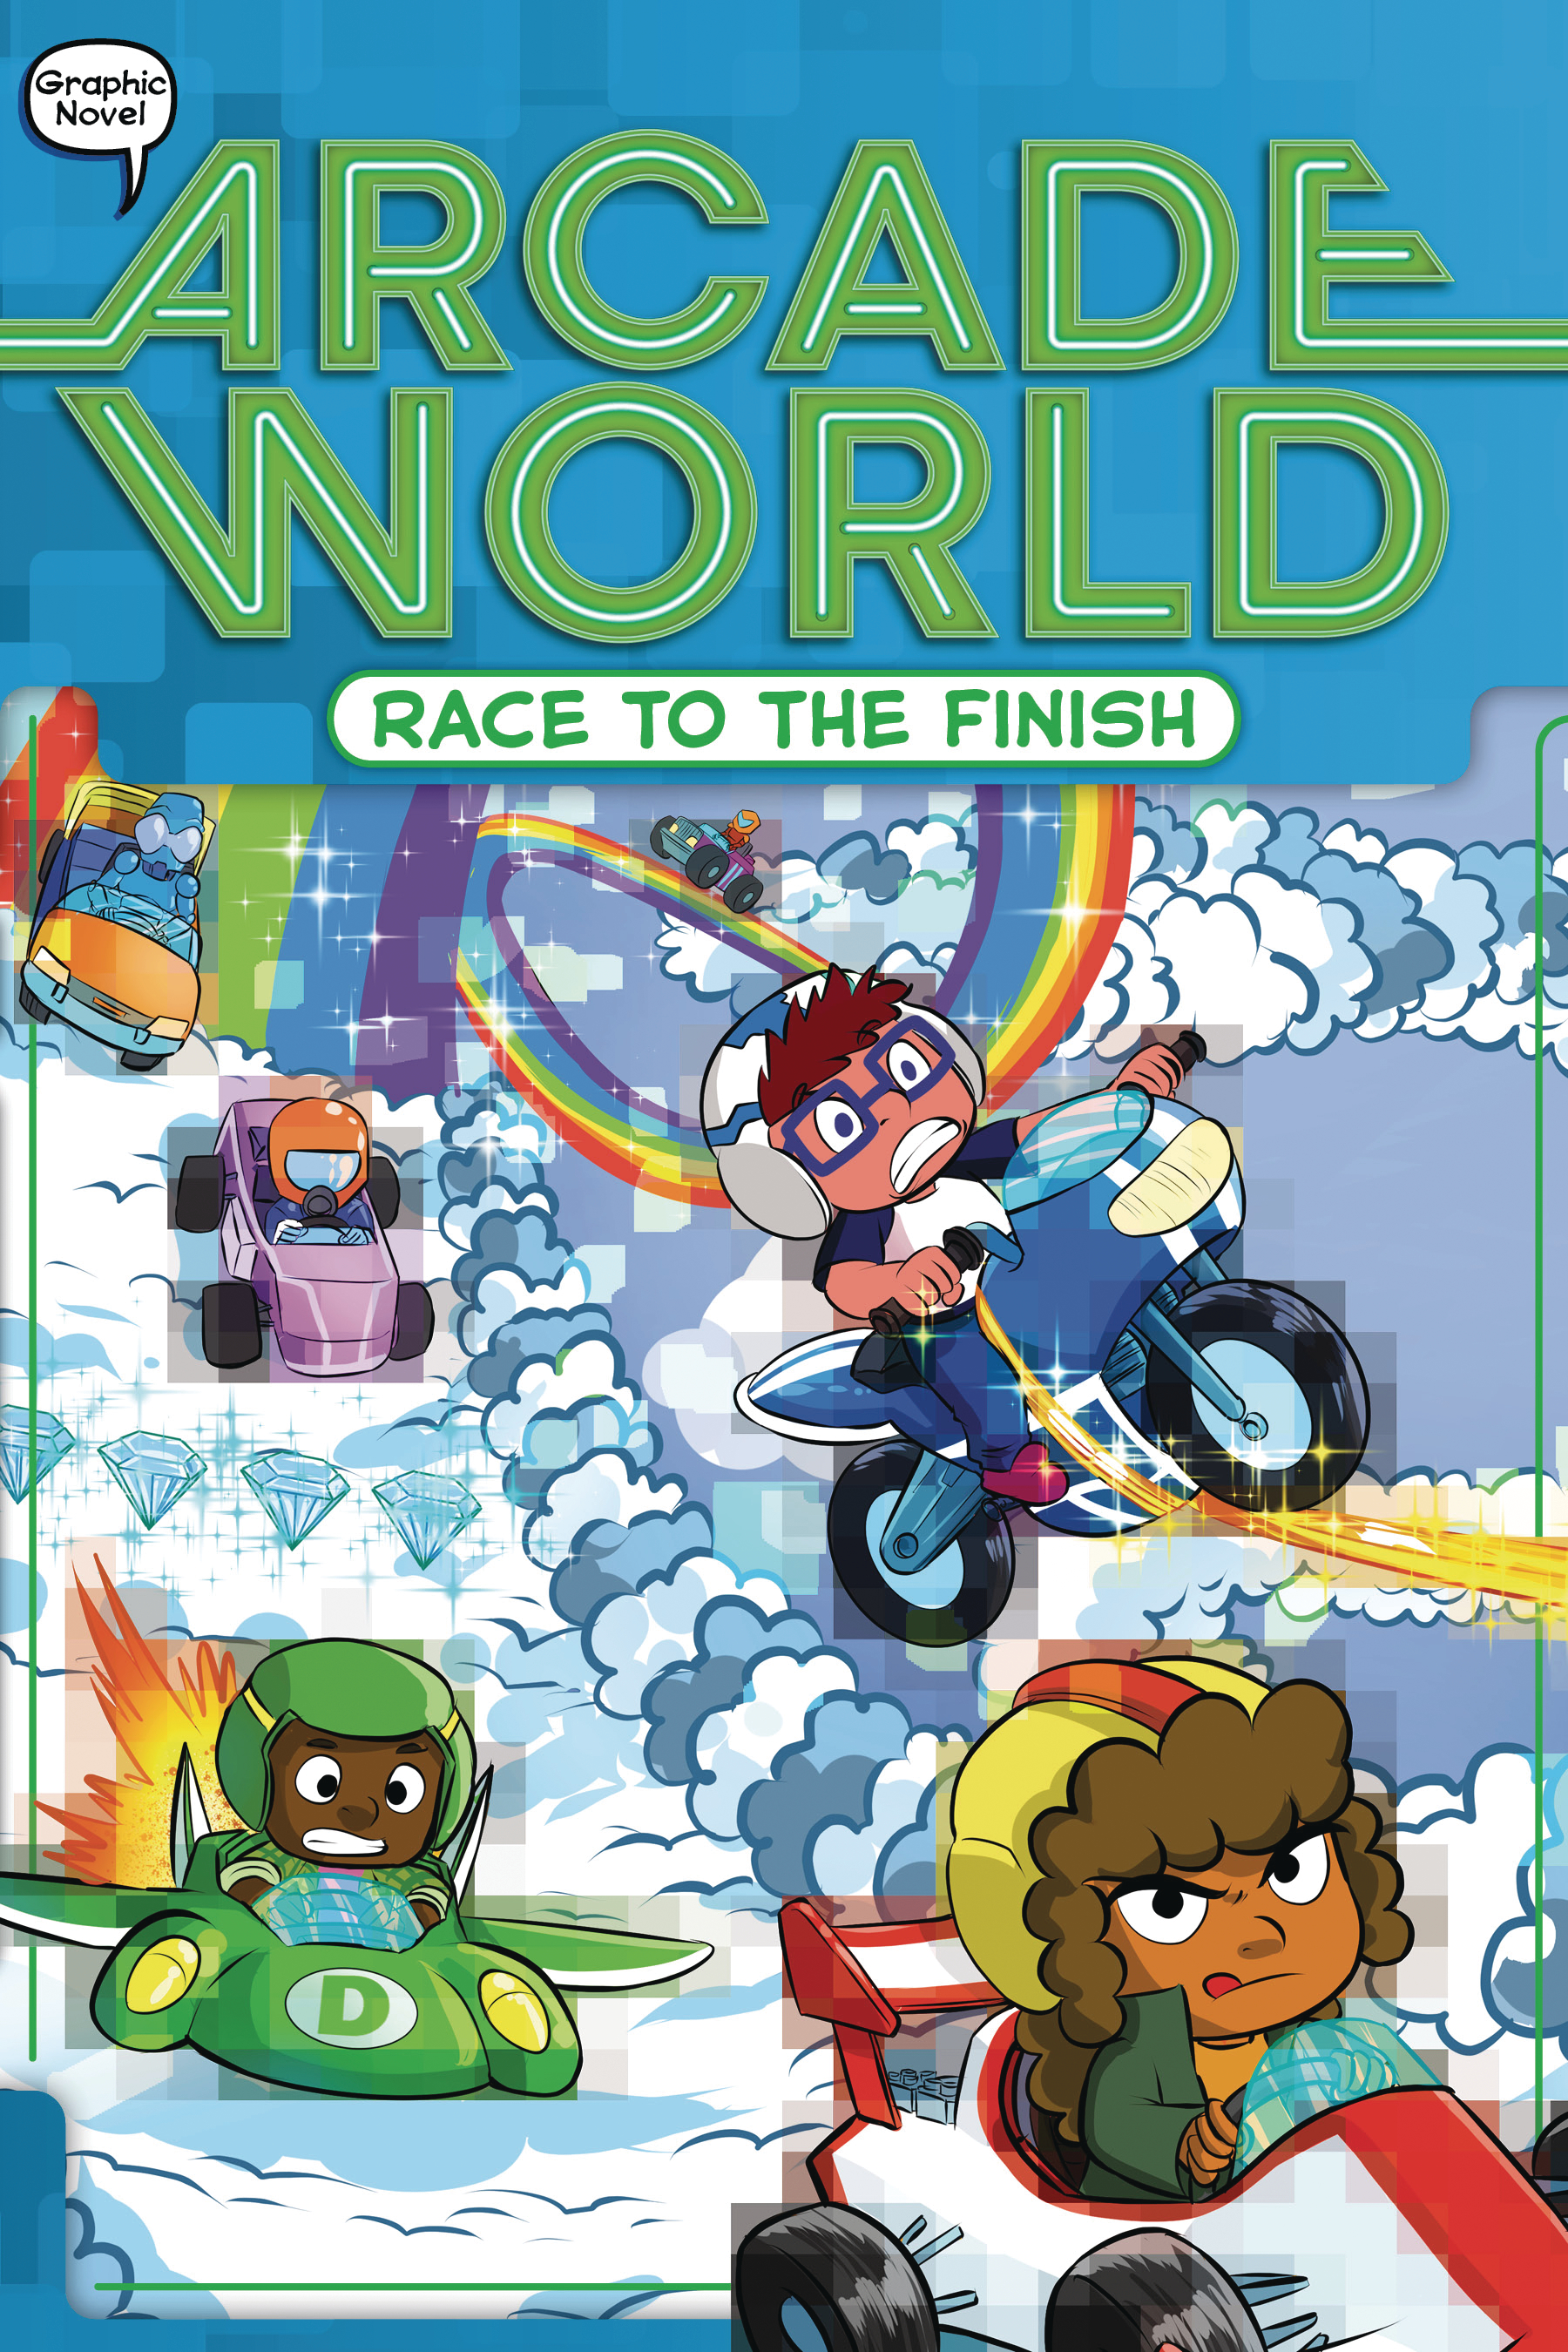 Arcade World Graphic Novel Chapterbook Volume 5 Race To The Finish